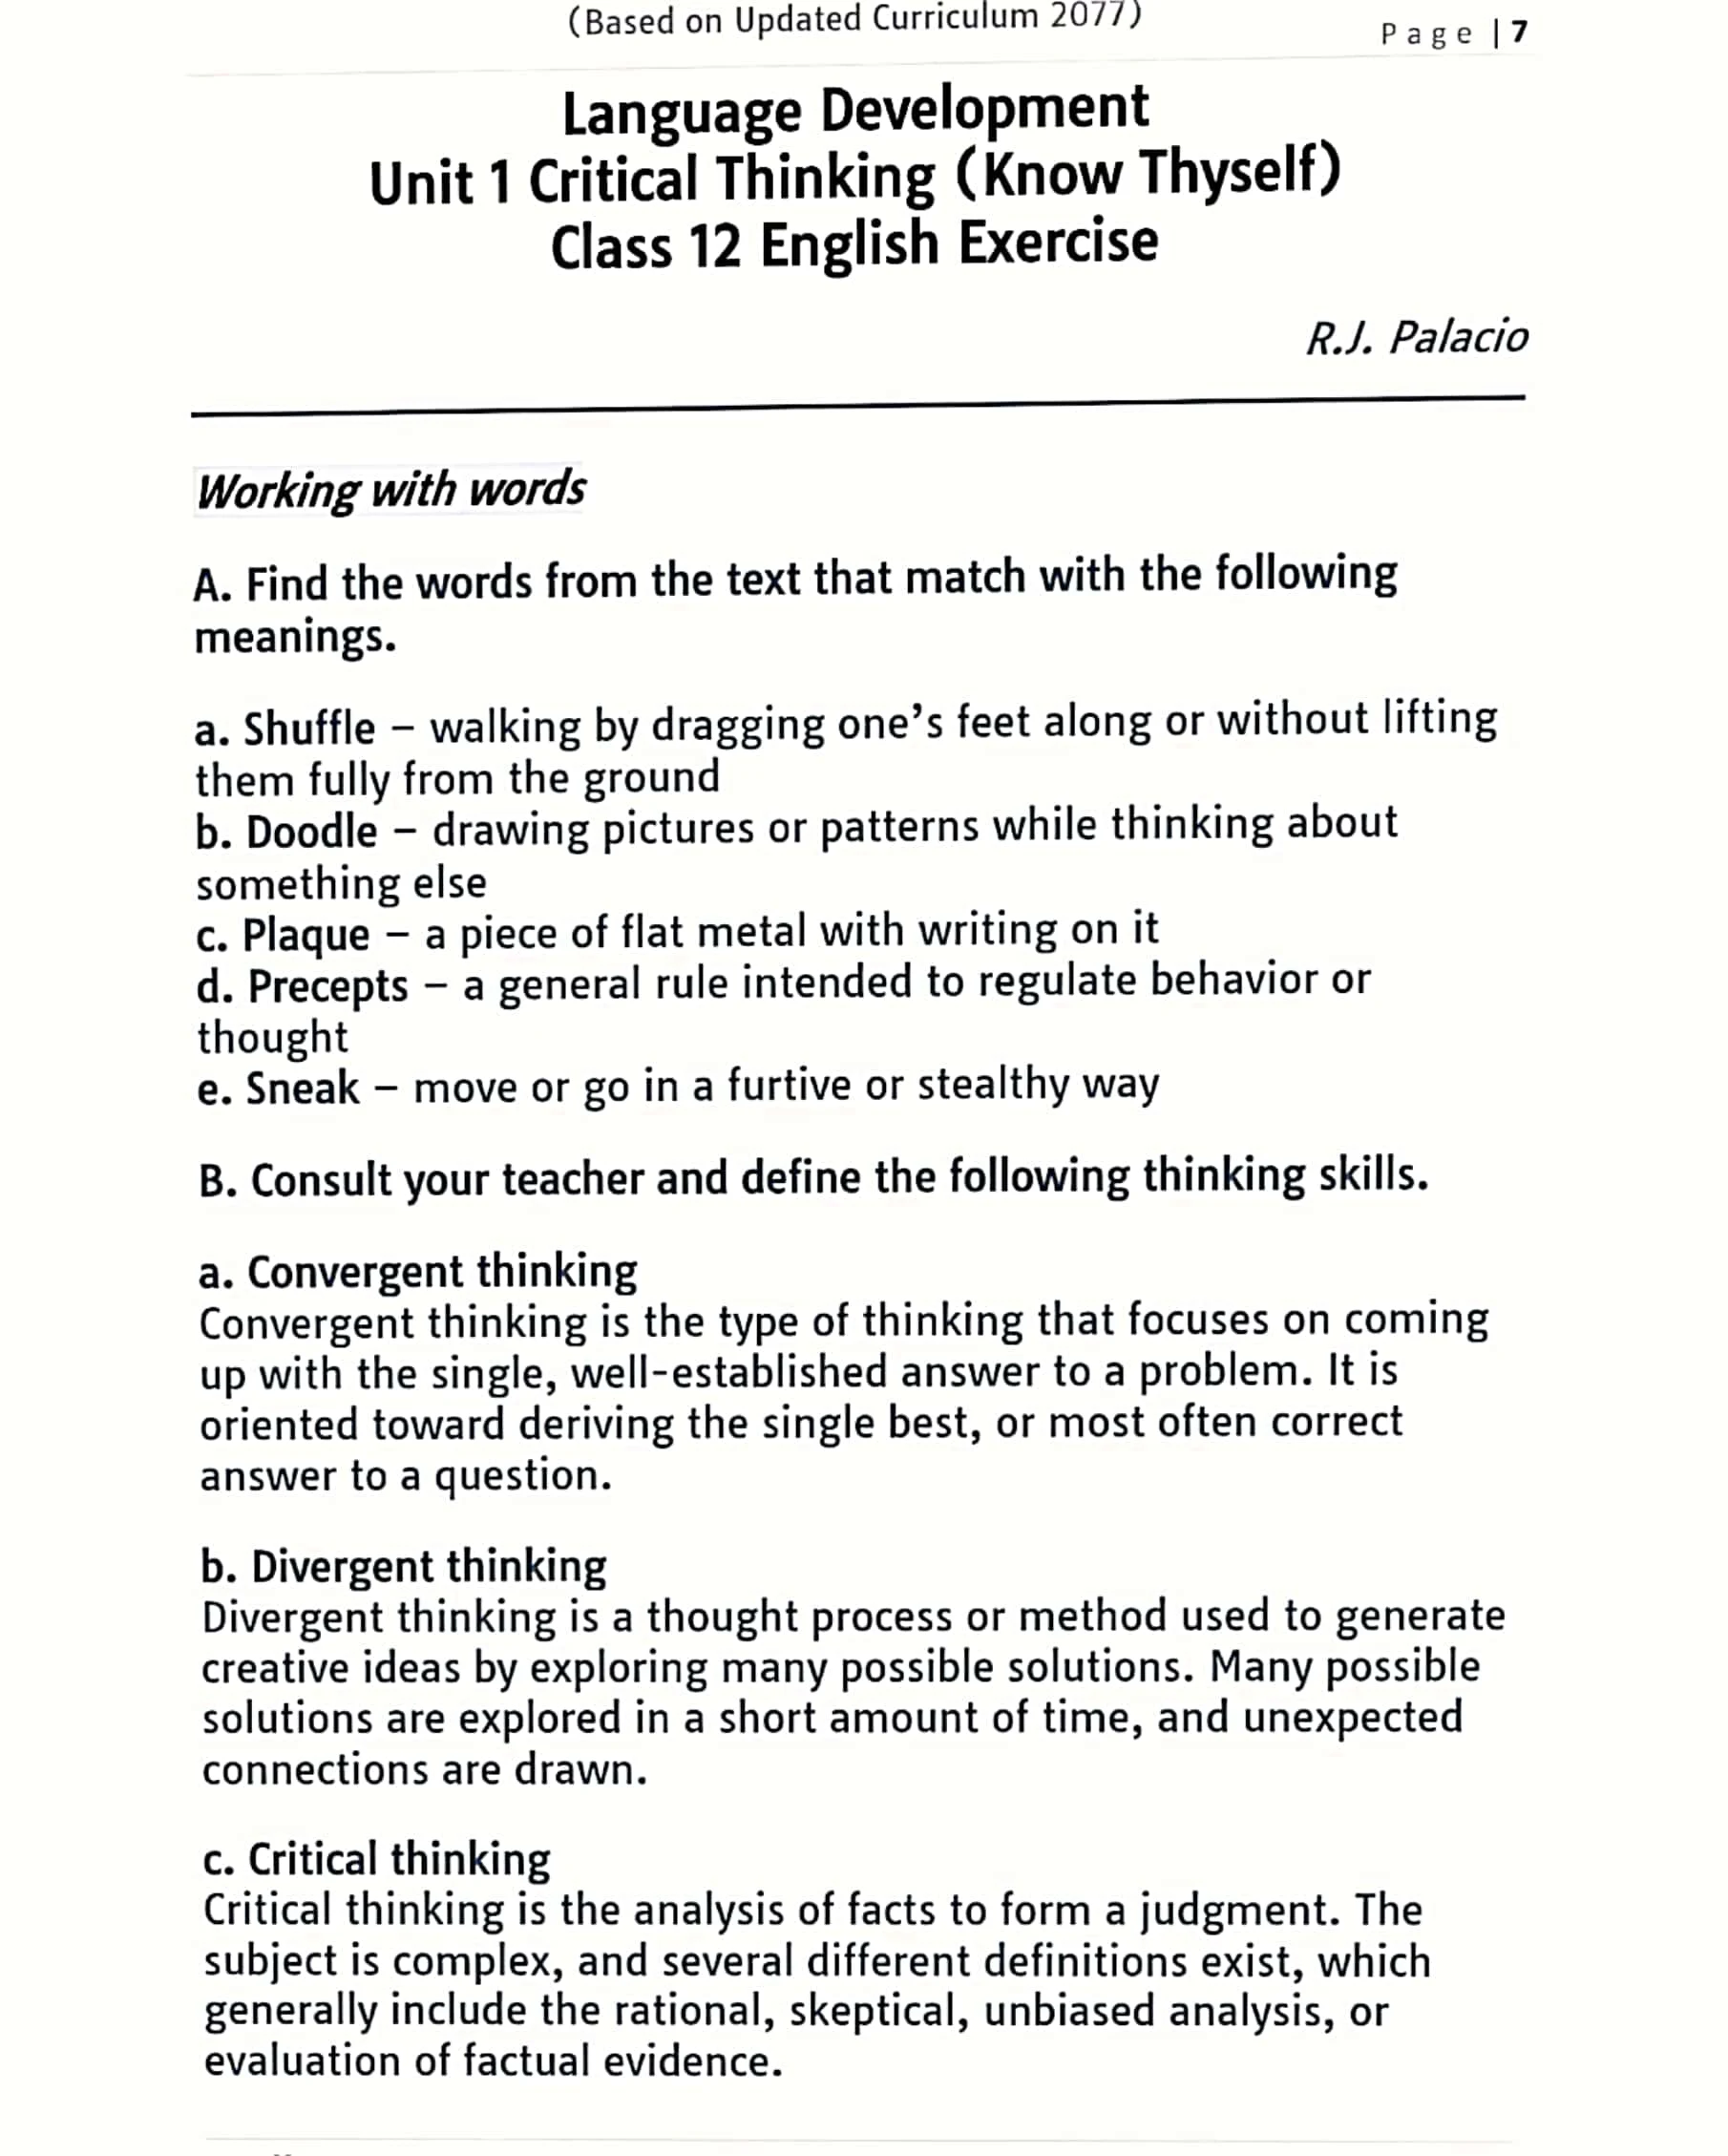 class 12 english book critical thinking exercise